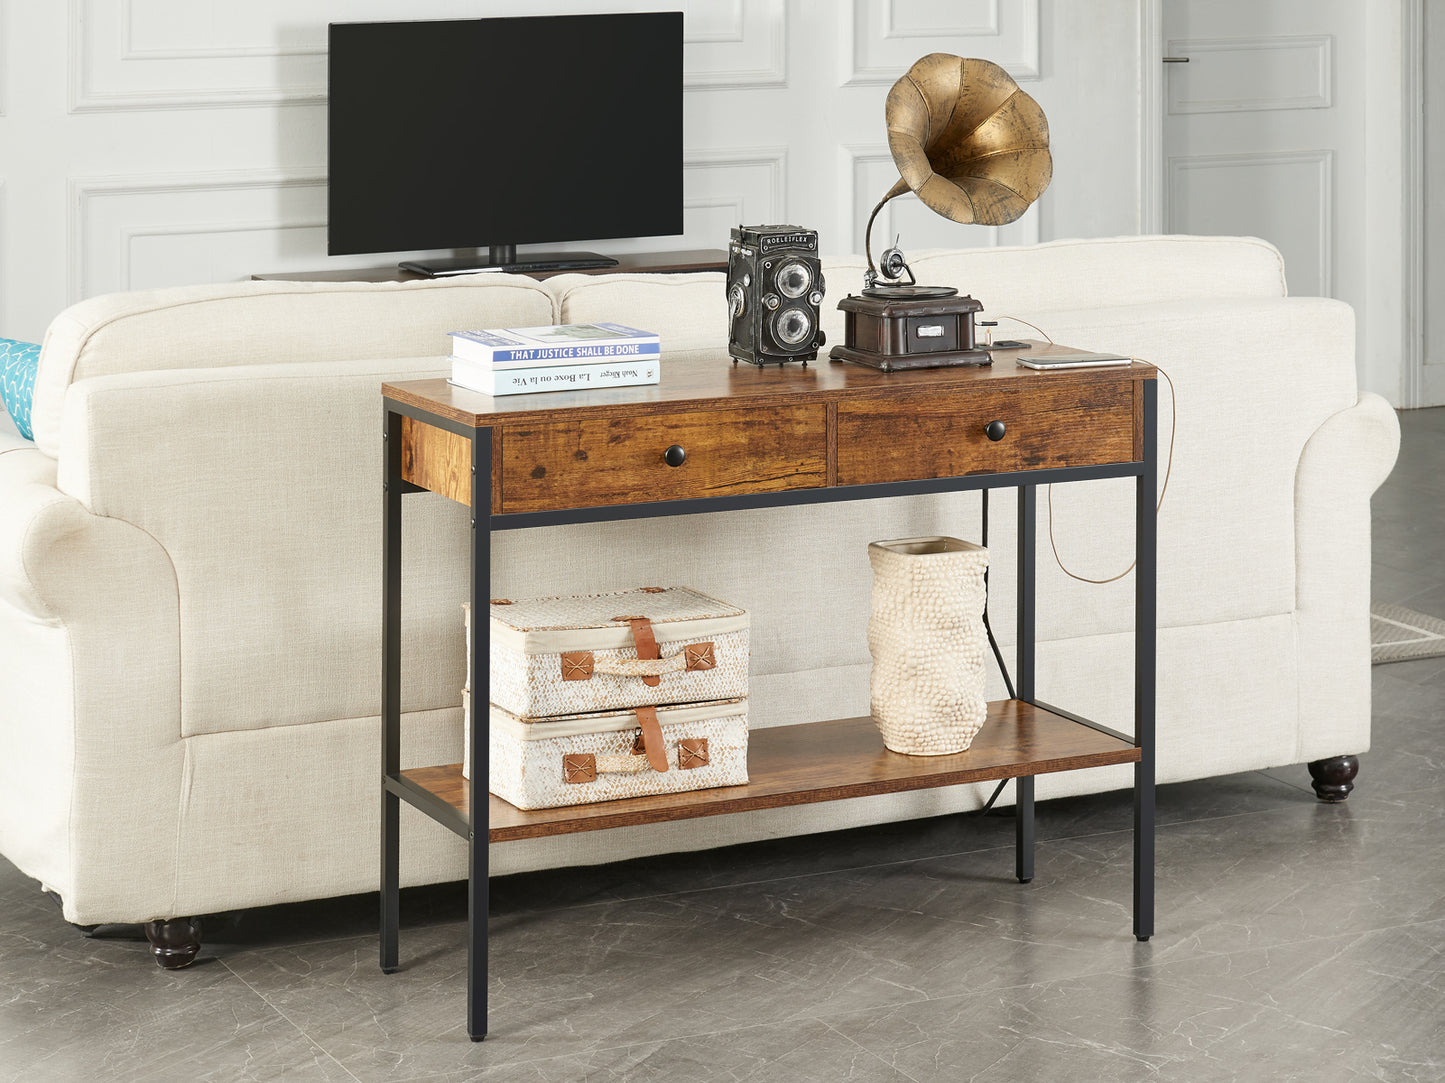 SUPERJARE Console Table with Power Outlet and USB Ports - Rustic Brown,7926FC